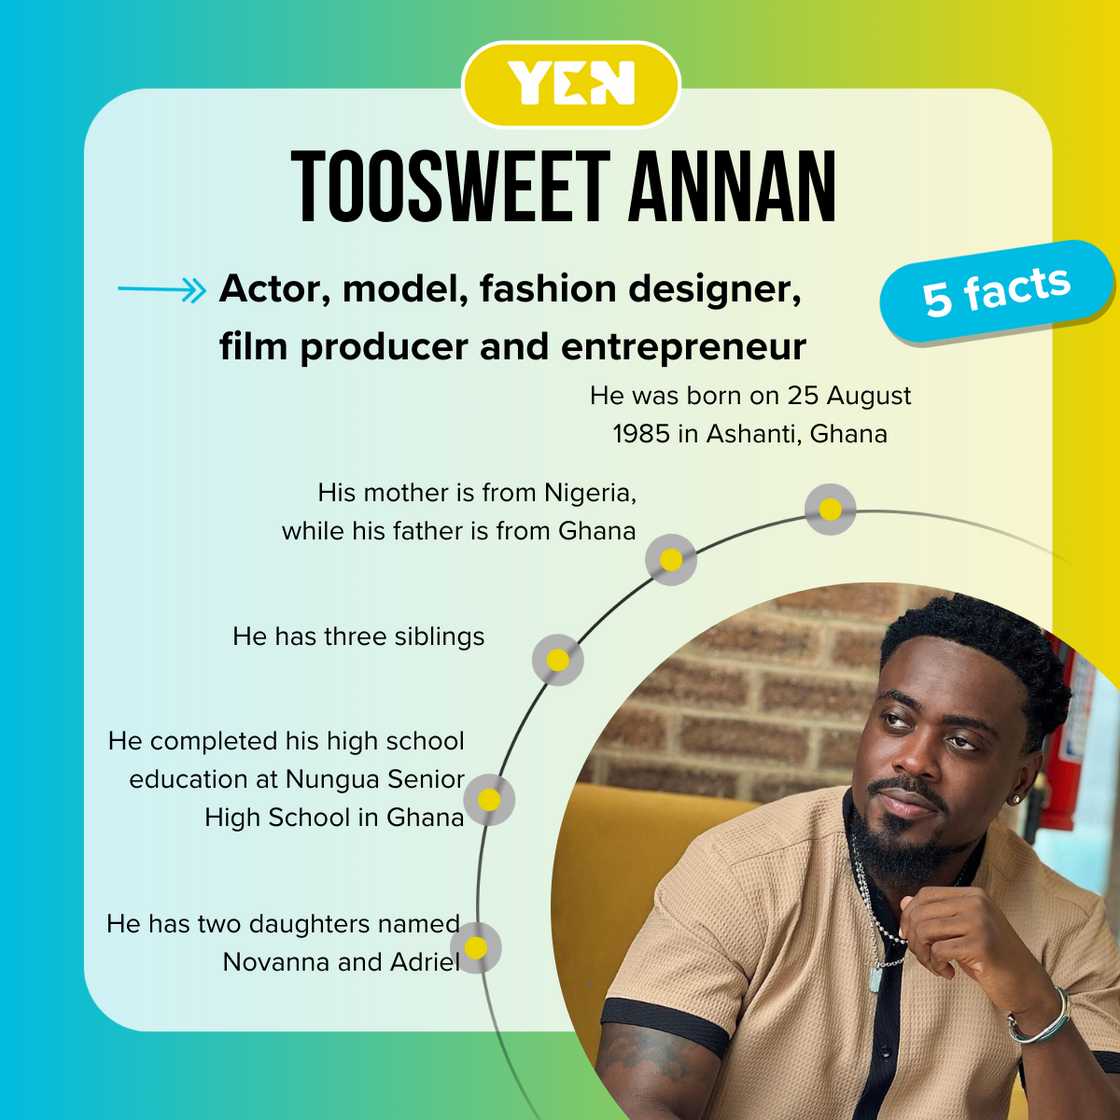 Top 5 facts about Toosweet Annan